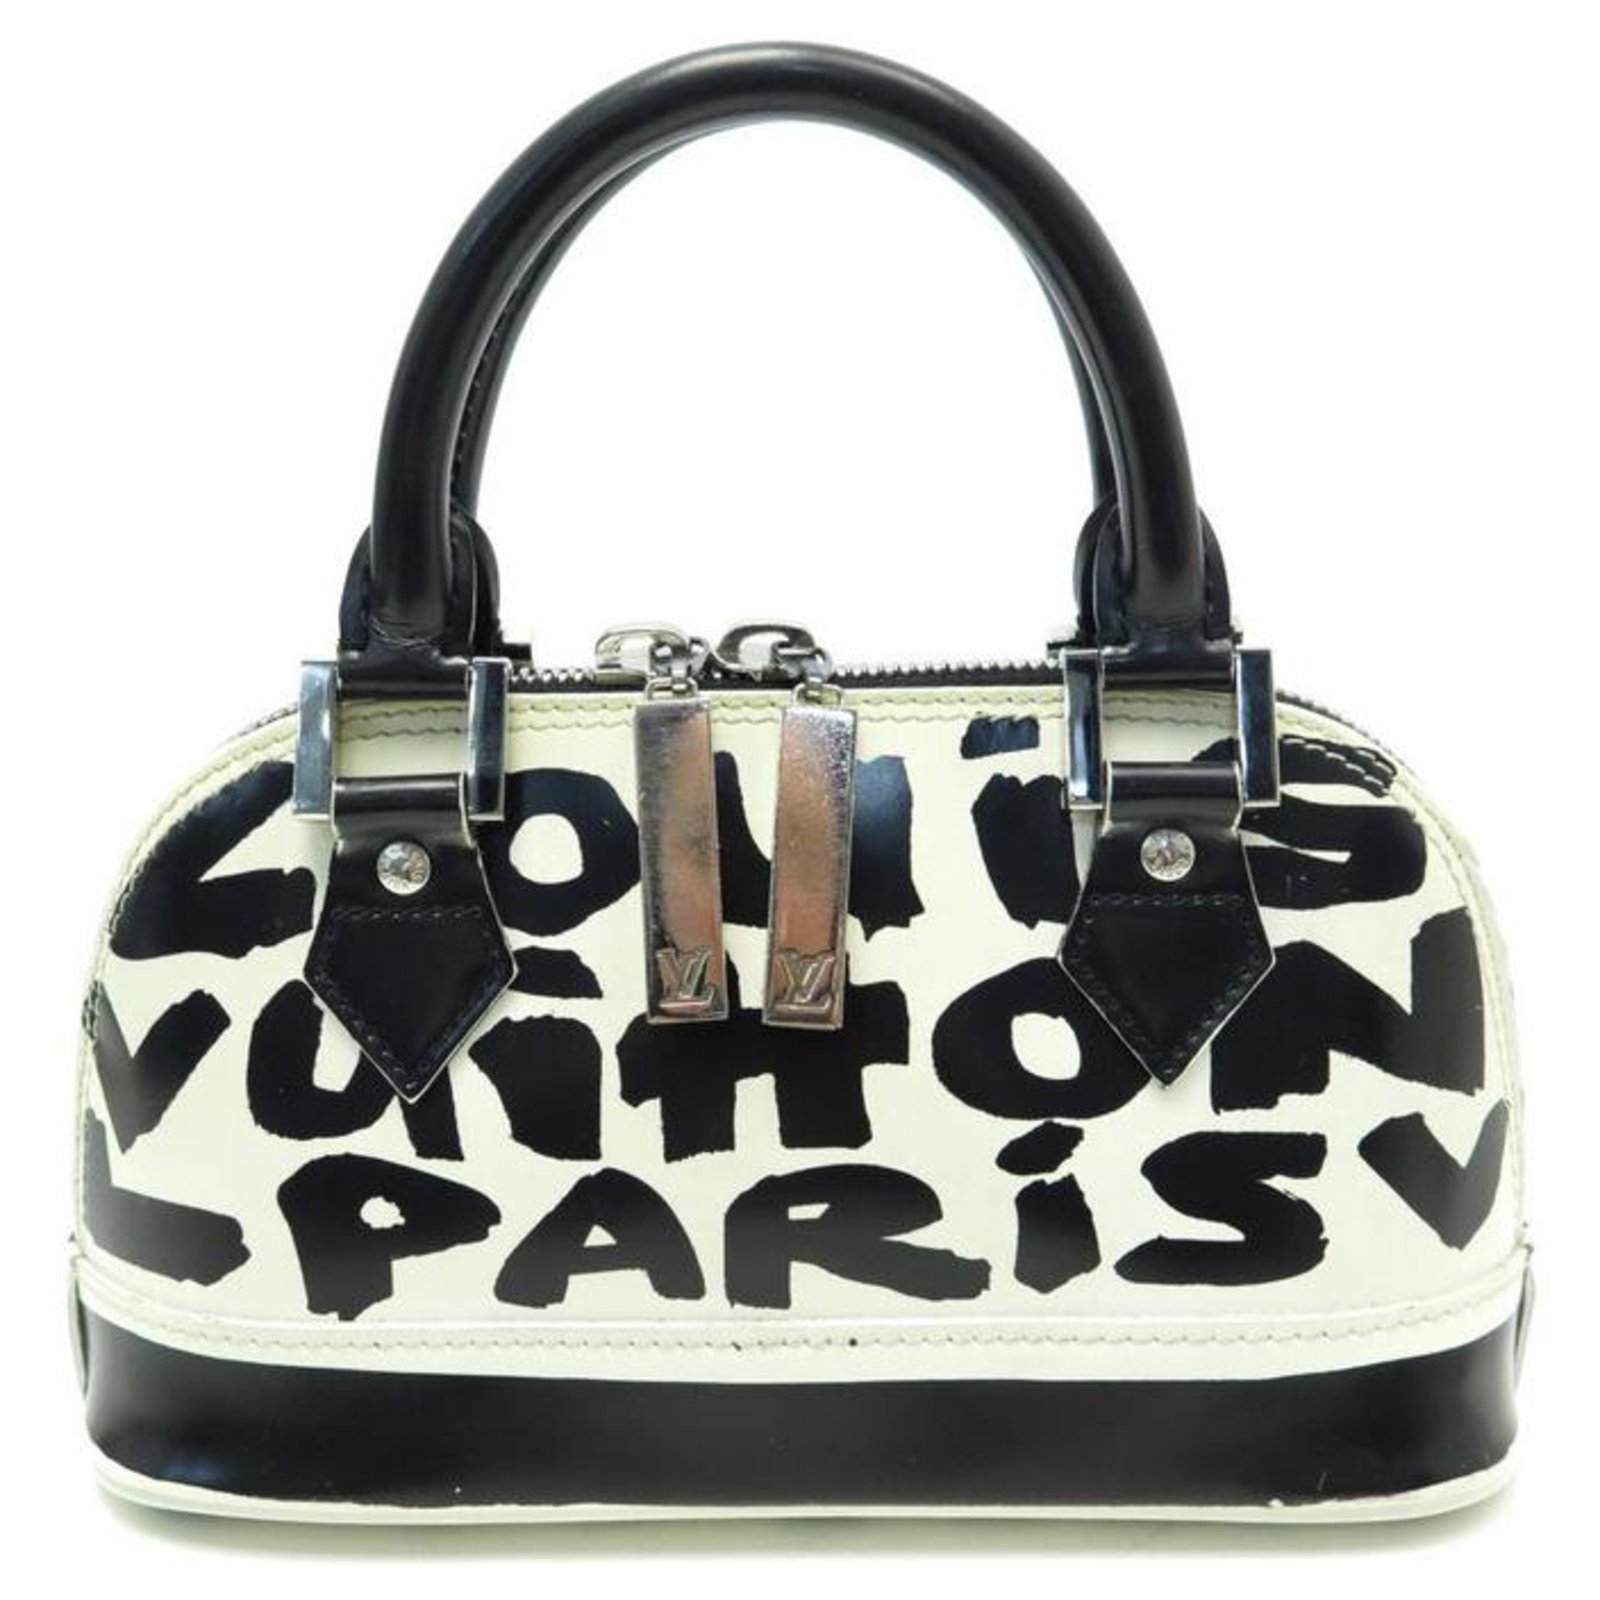 Pink and white Mini Alma bag Graffiti Collection by Stephen